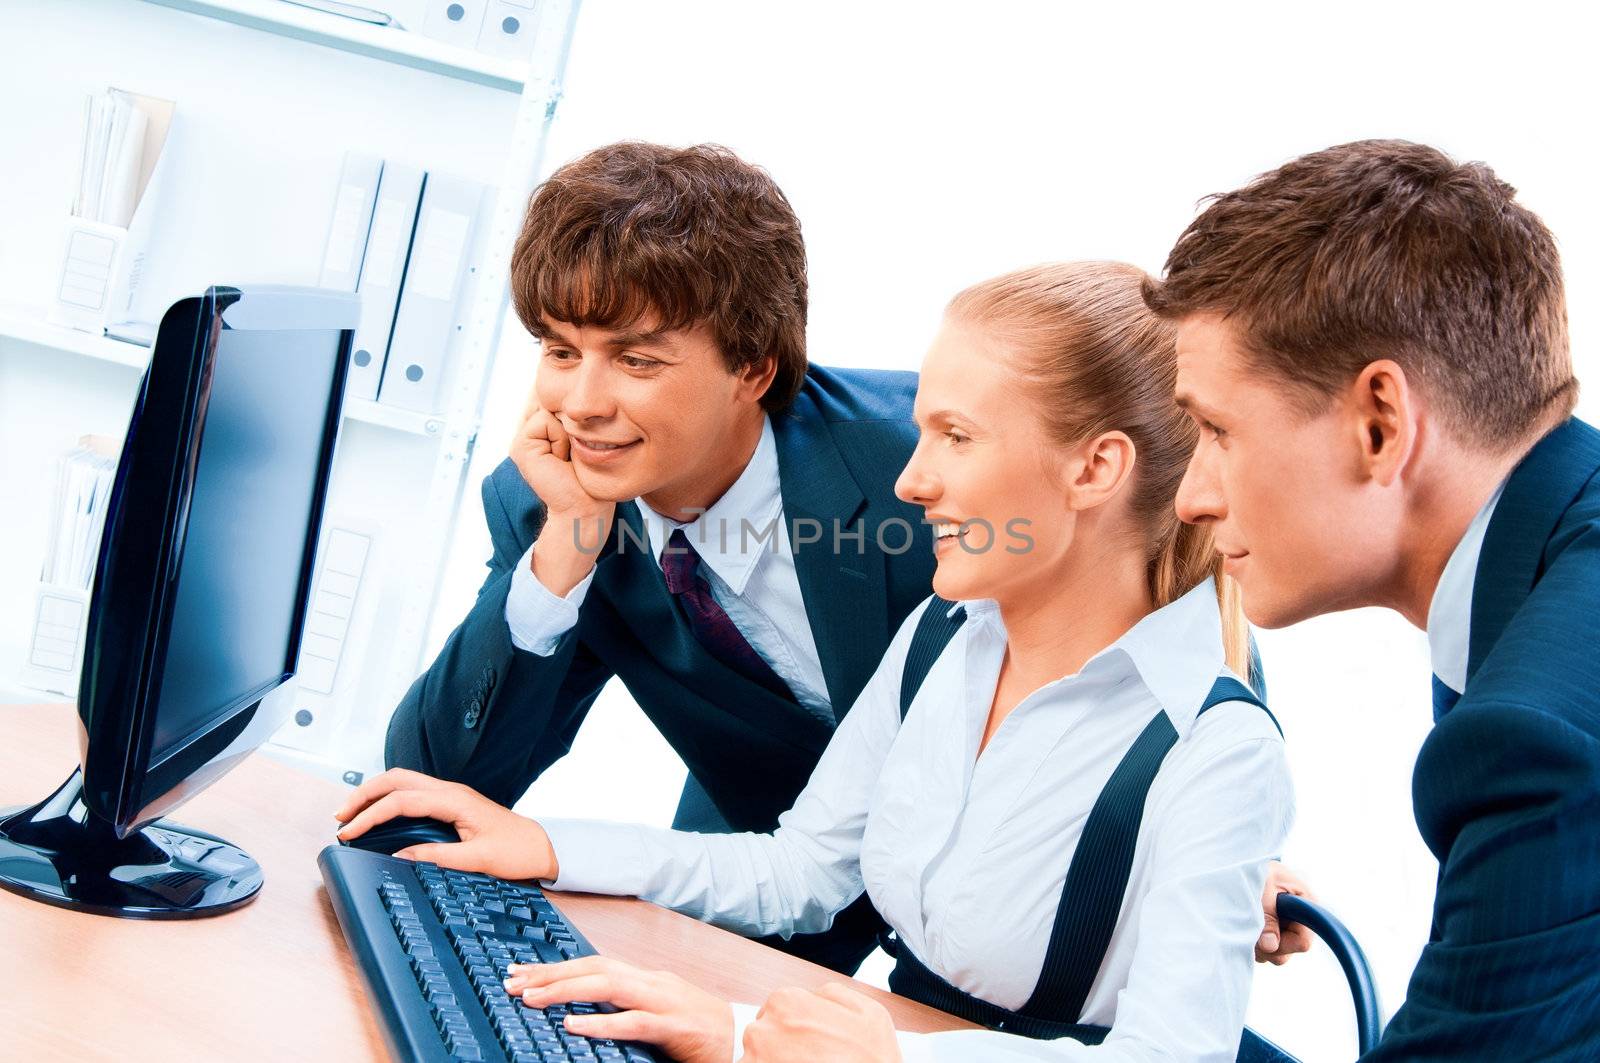 Three young successful businesspeople. Screen has a clipping path.